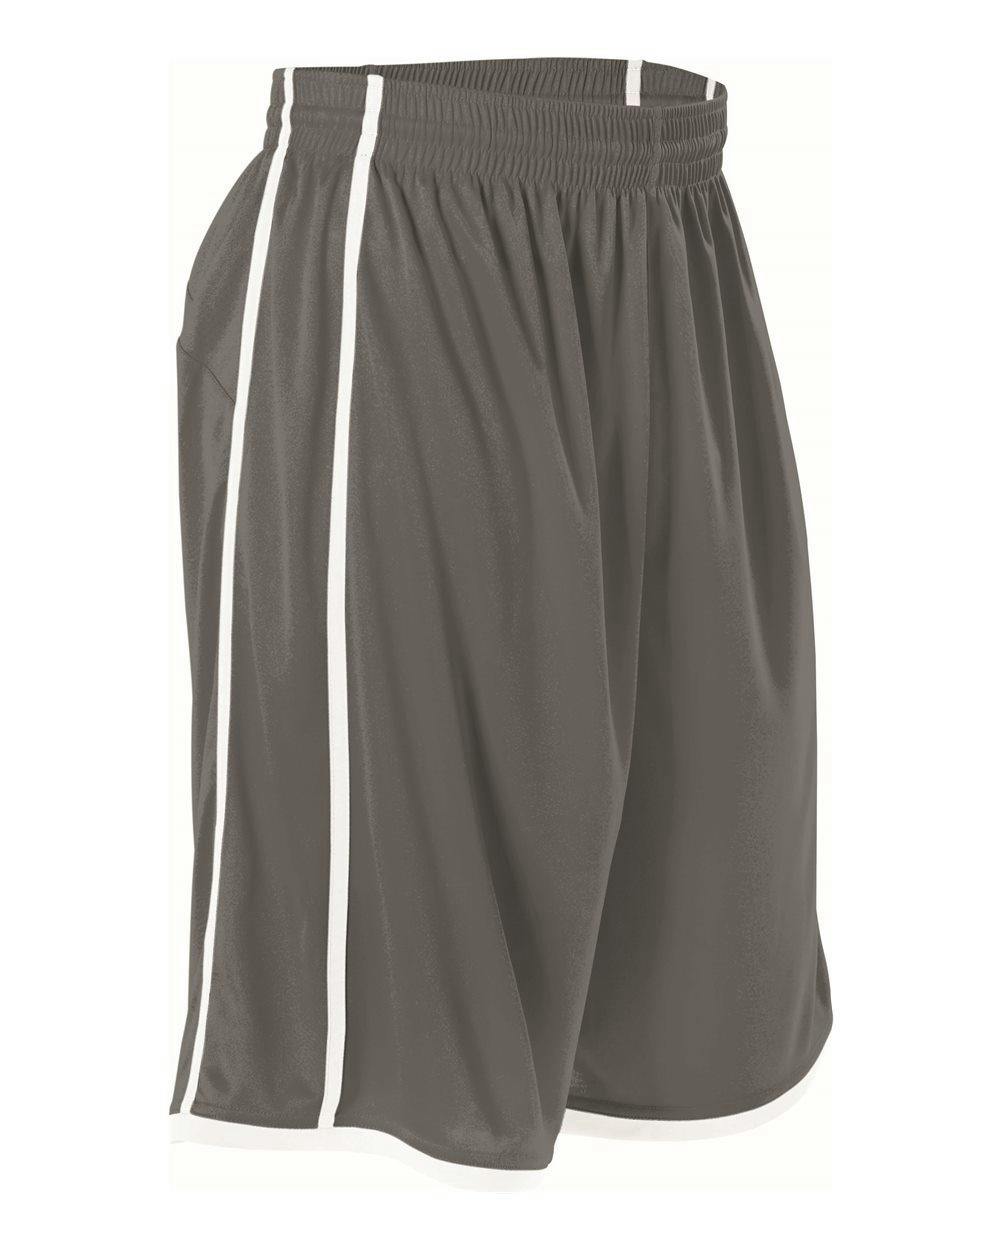 Image for Youth Basketball Shorts - 535PY